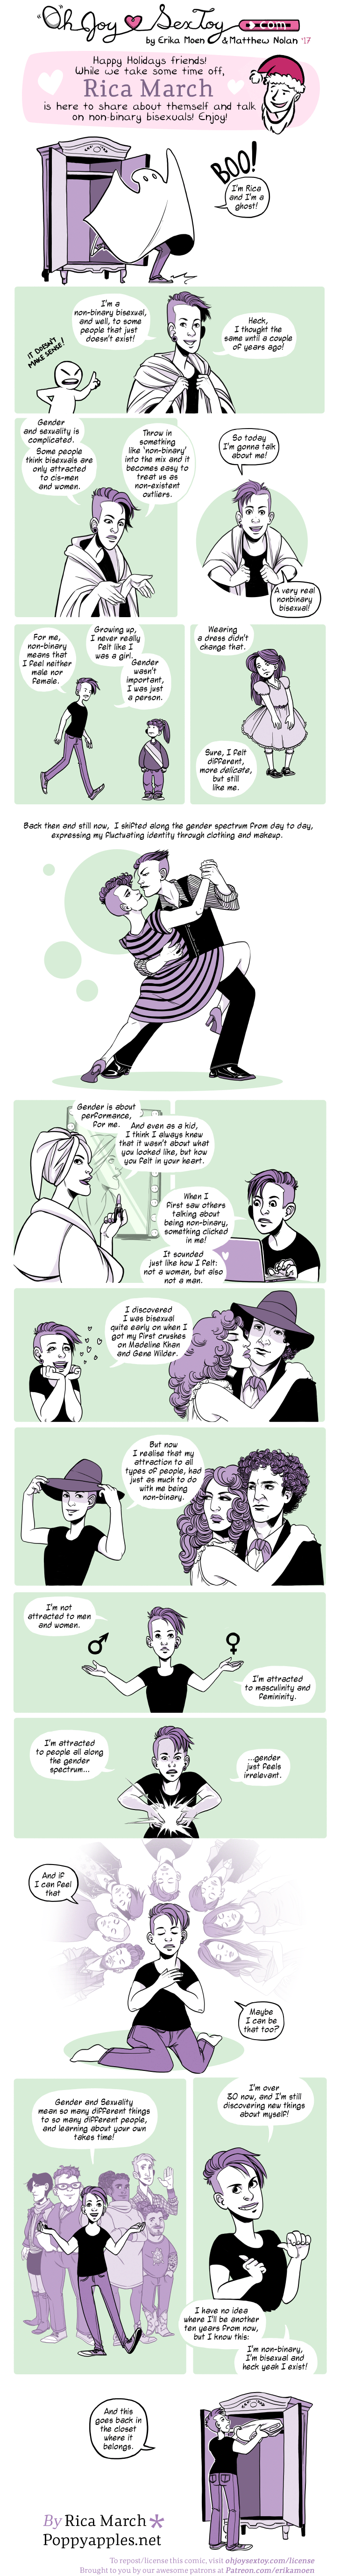 Non-Binary And Bisexual by Rica March